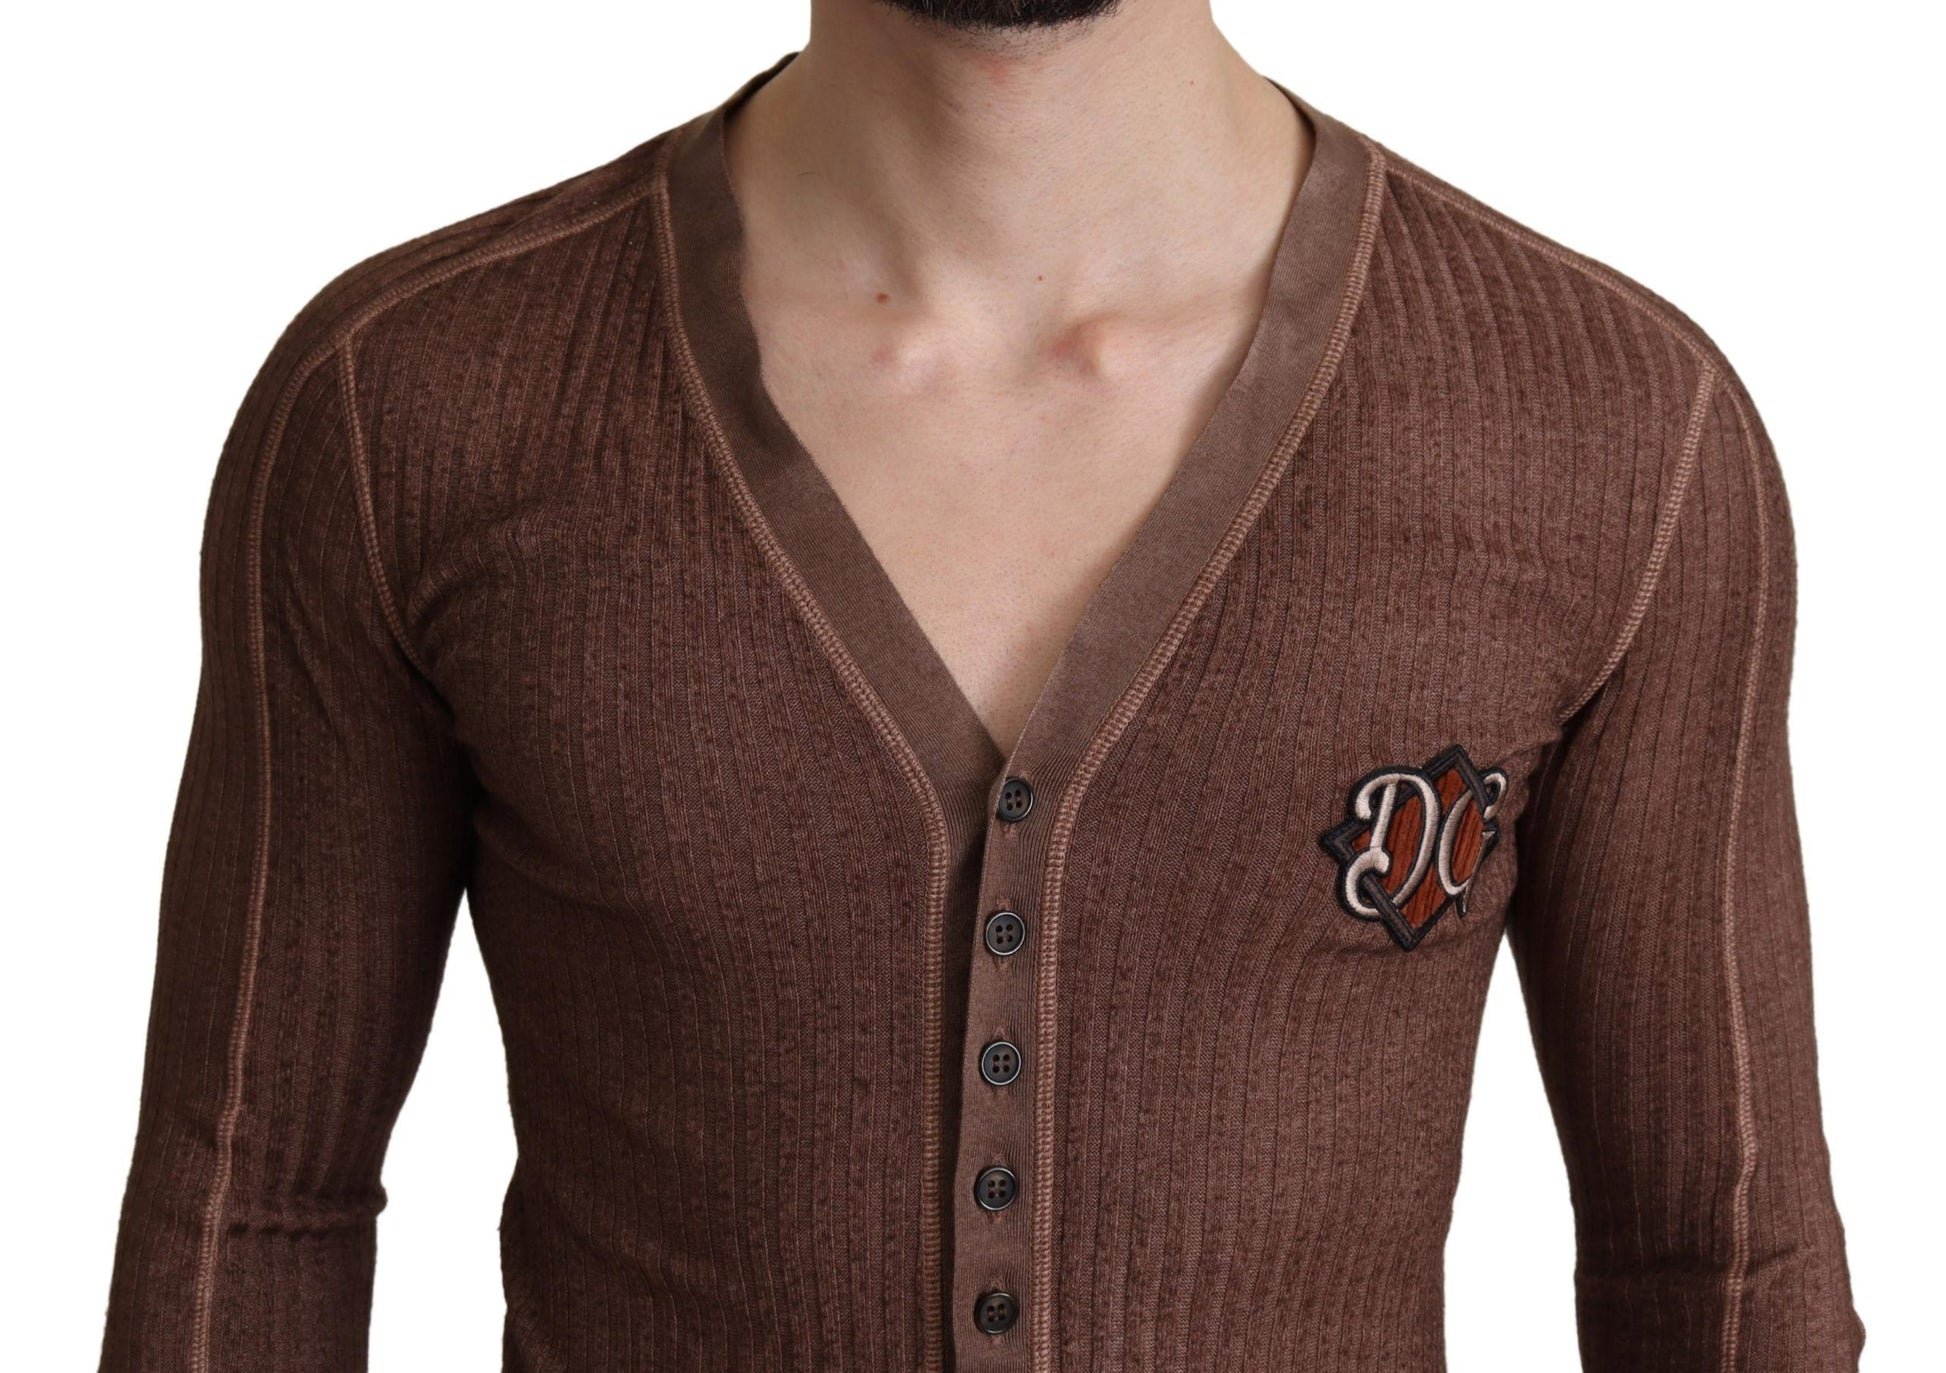 Brown Logo Button Cardigan V-neck Sweater - Designed by Dolce & Gabbana Available to Buy at a Discounted Price on Moon Behind The Hill Online Designer Discount Store